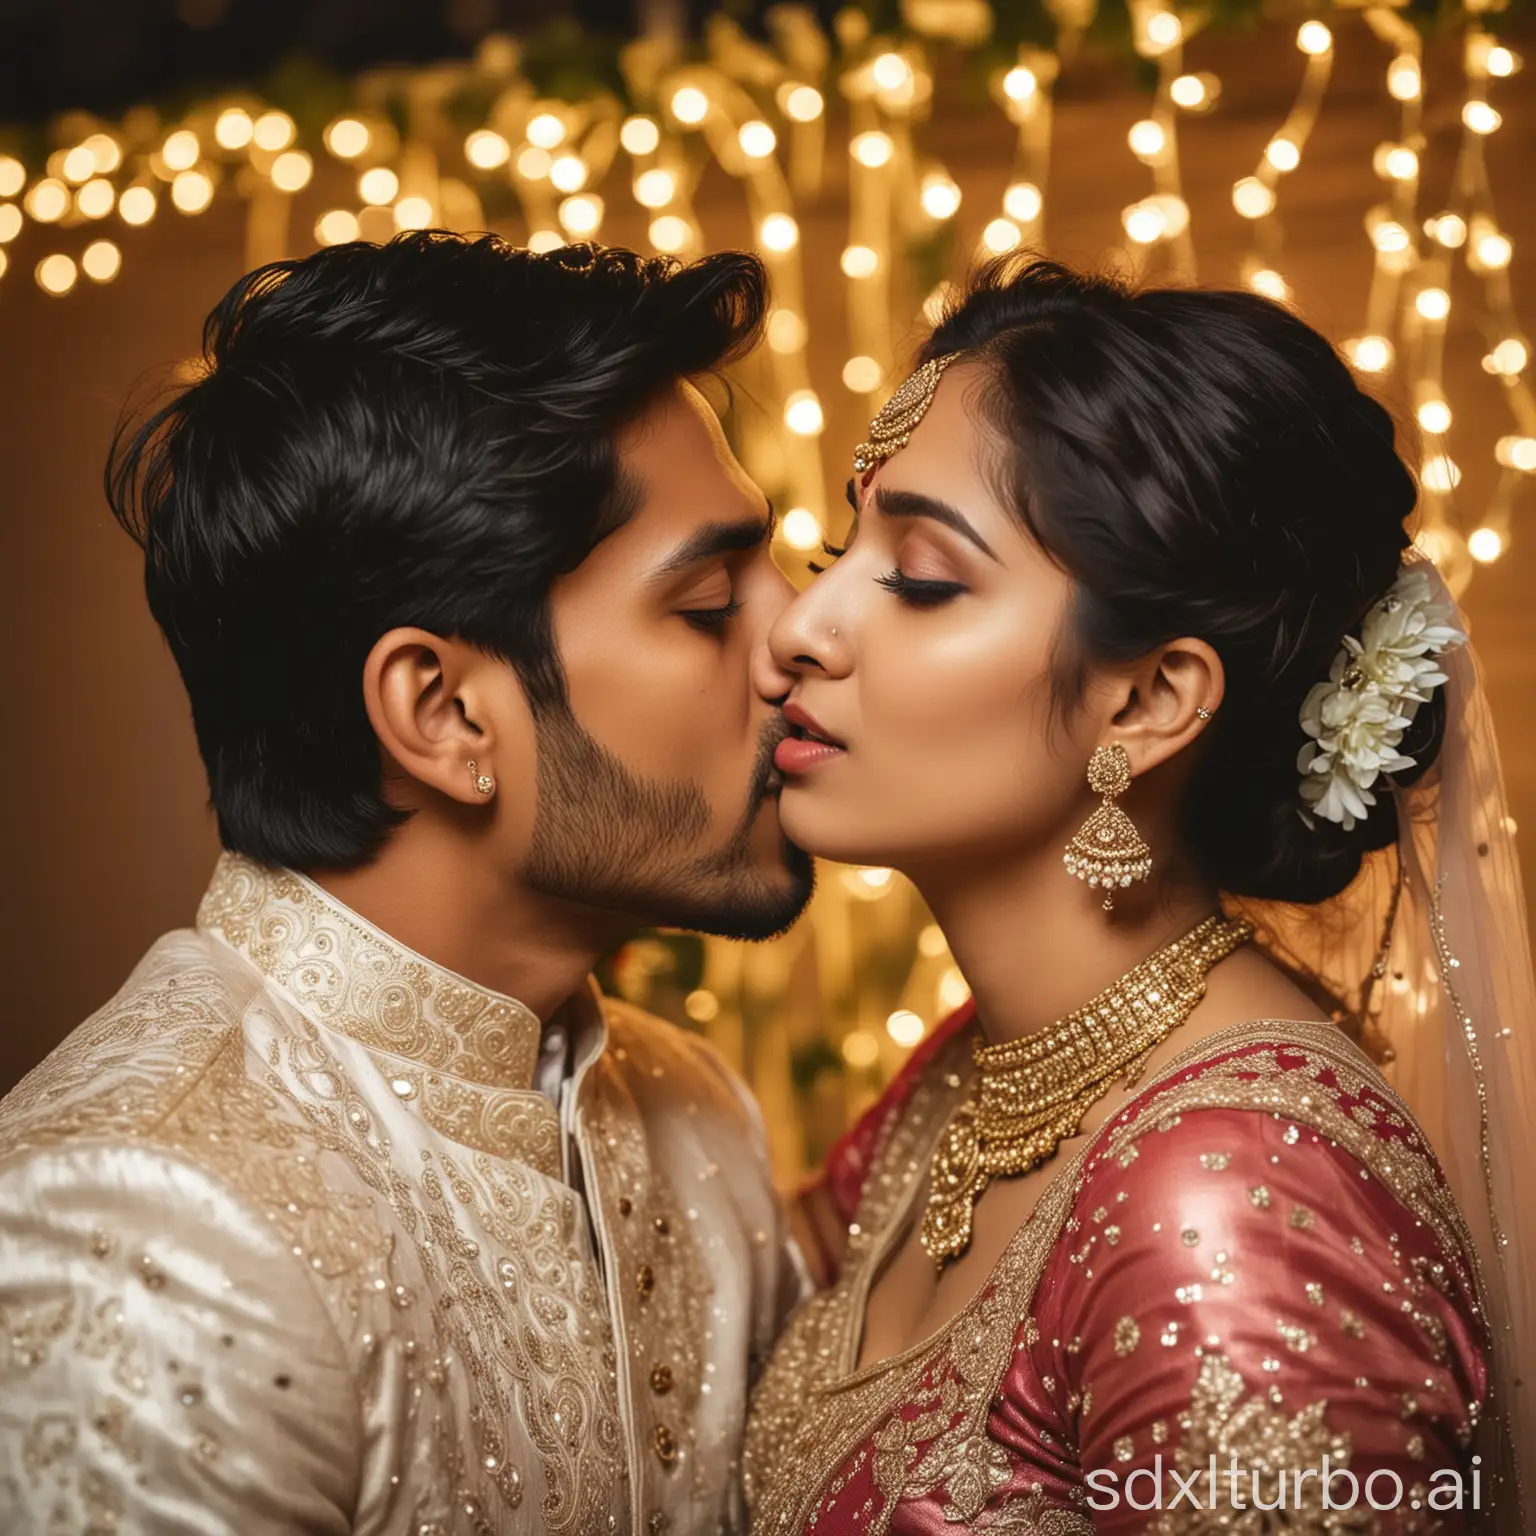 Indian-Engagement-Night-Young-Bride-Kisses-Handsome-Groom-in-Garden-Party-Lights